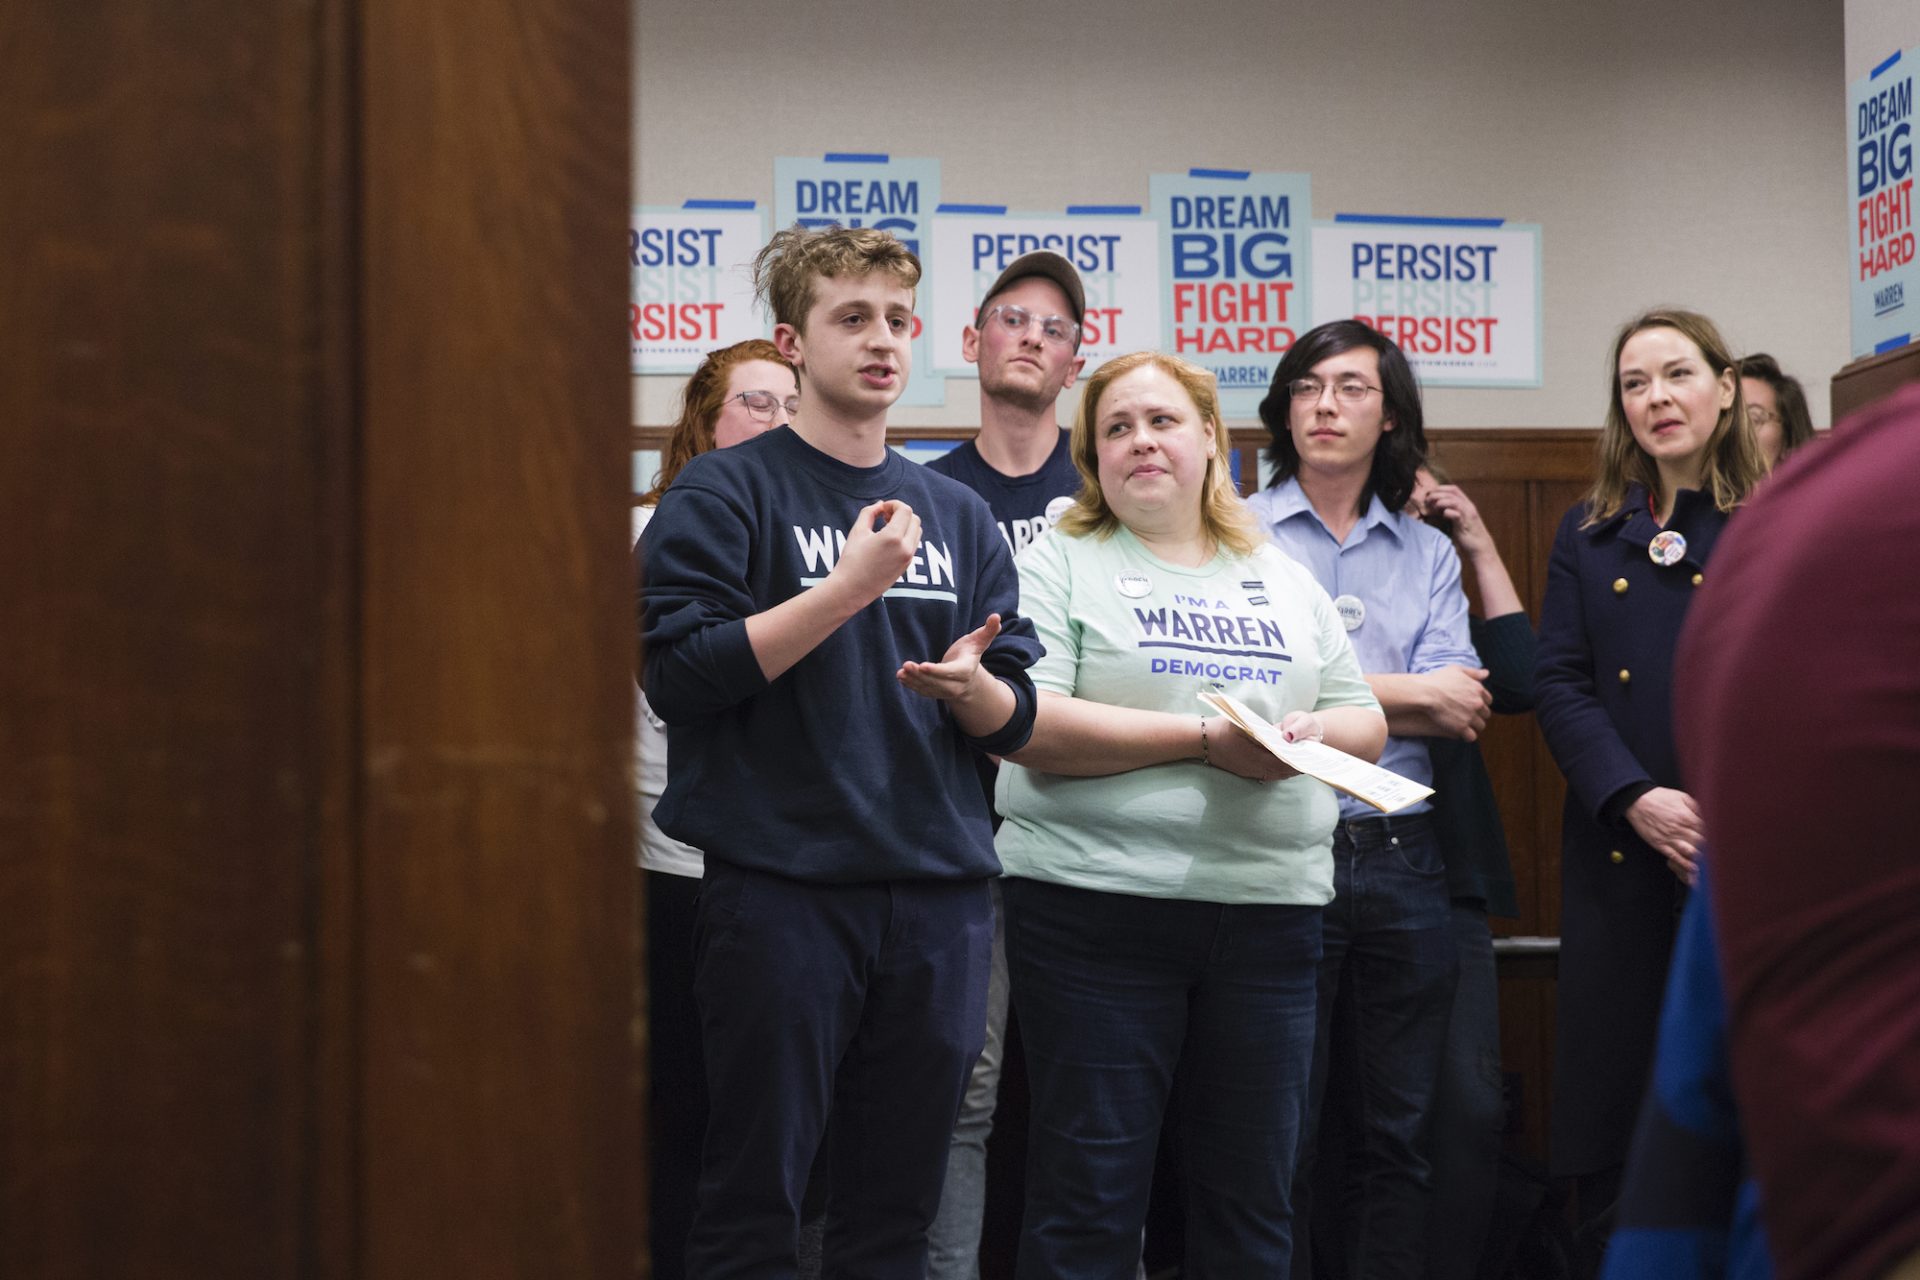 (From left) Jack DiPrimio and Beth Finn petition for candidate Elizabeth Warren at the University of Pennsylvania satellite Iowa caucus on February 3, 2020.